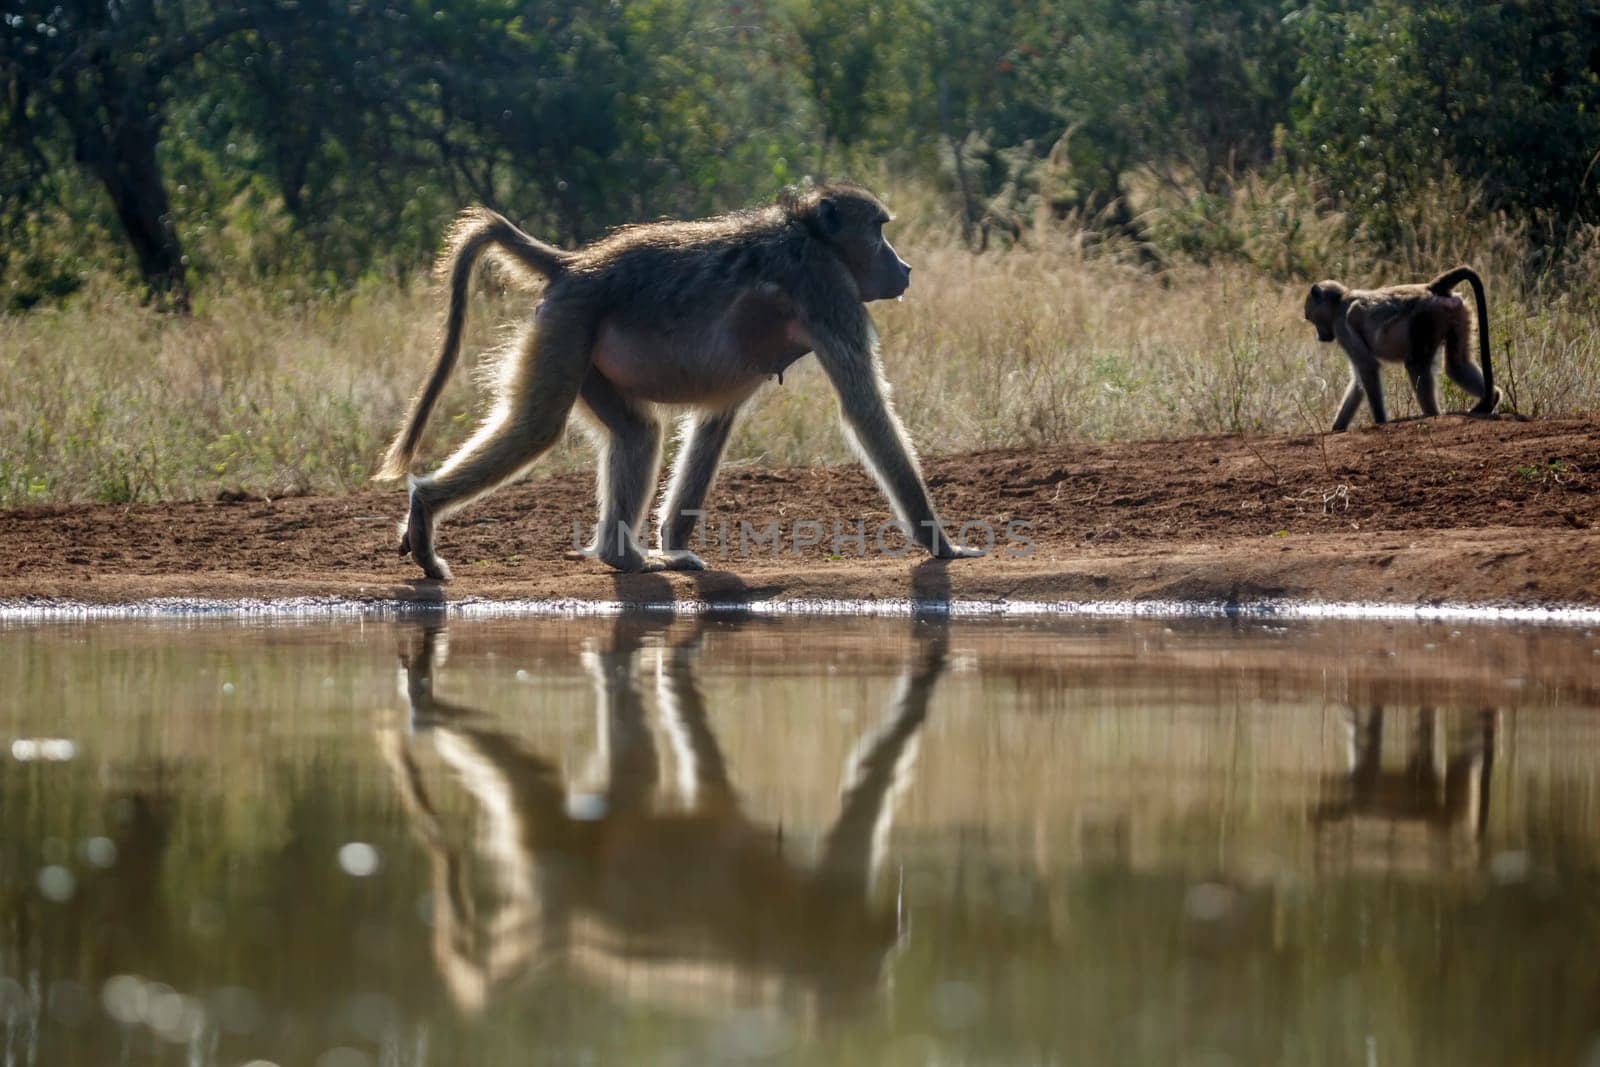 Chacma baboon in Kruger National park, South Africa by PACOCOMO